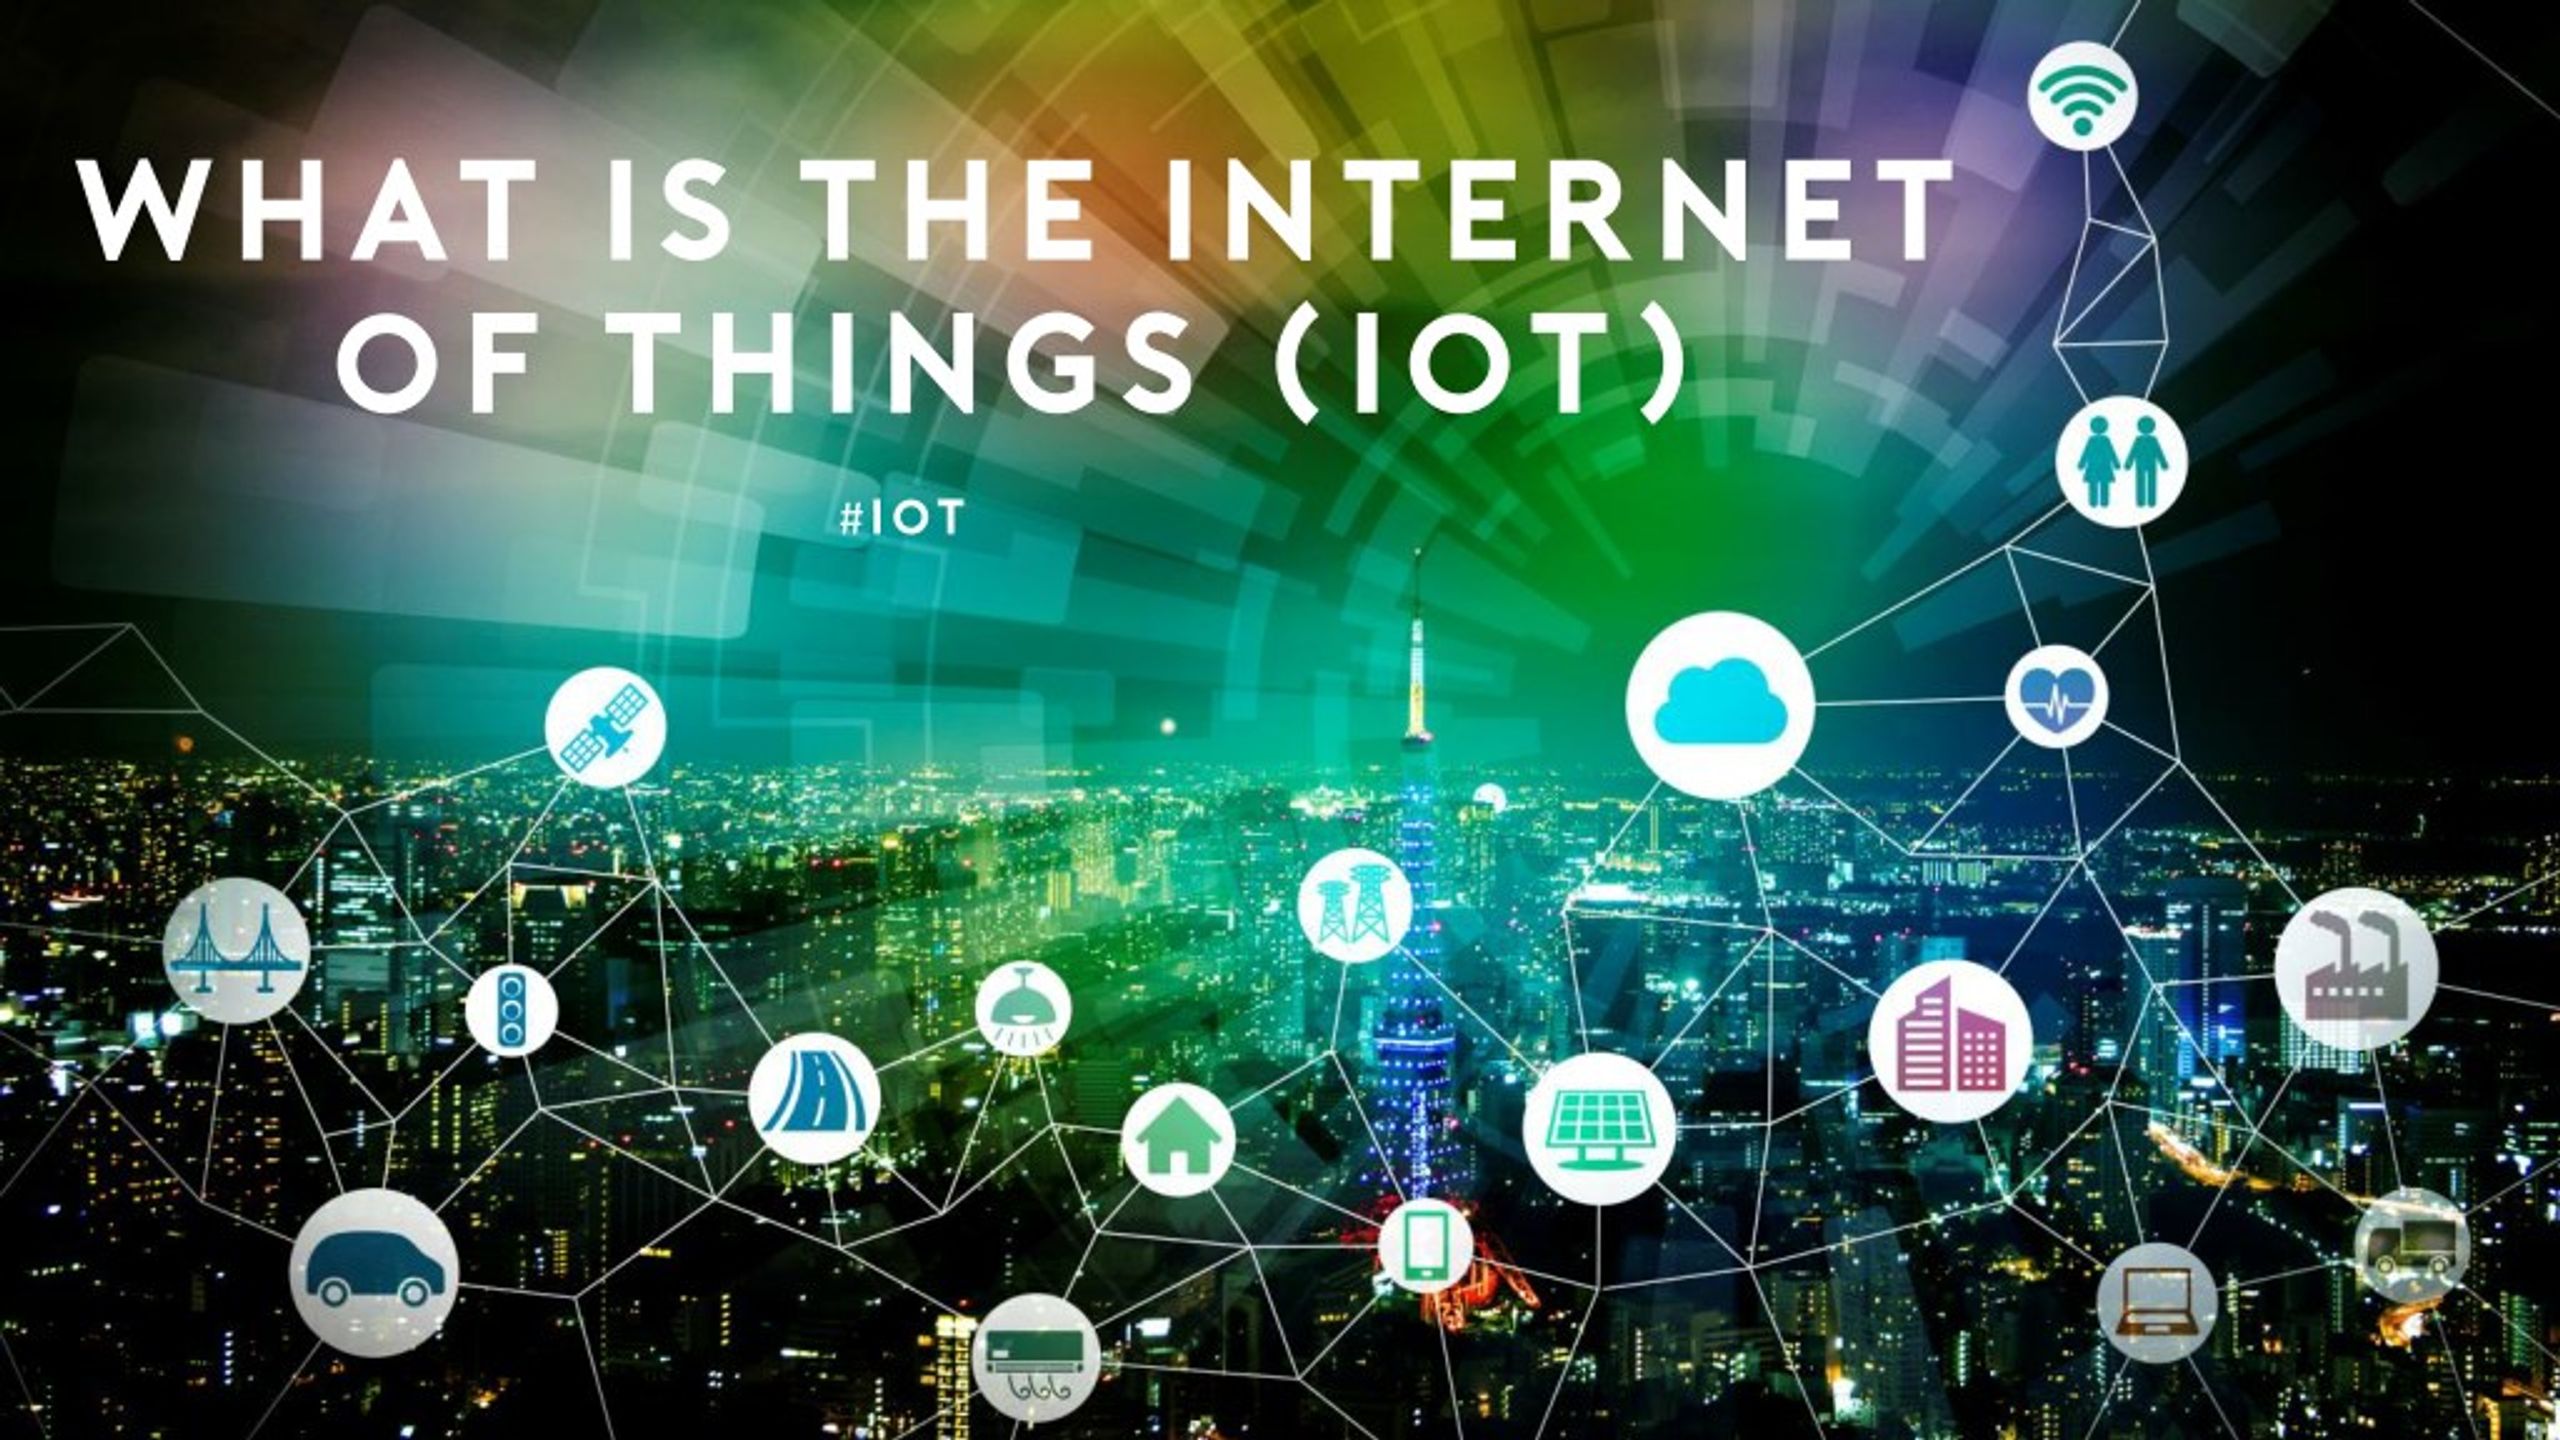 presentation of internet of things